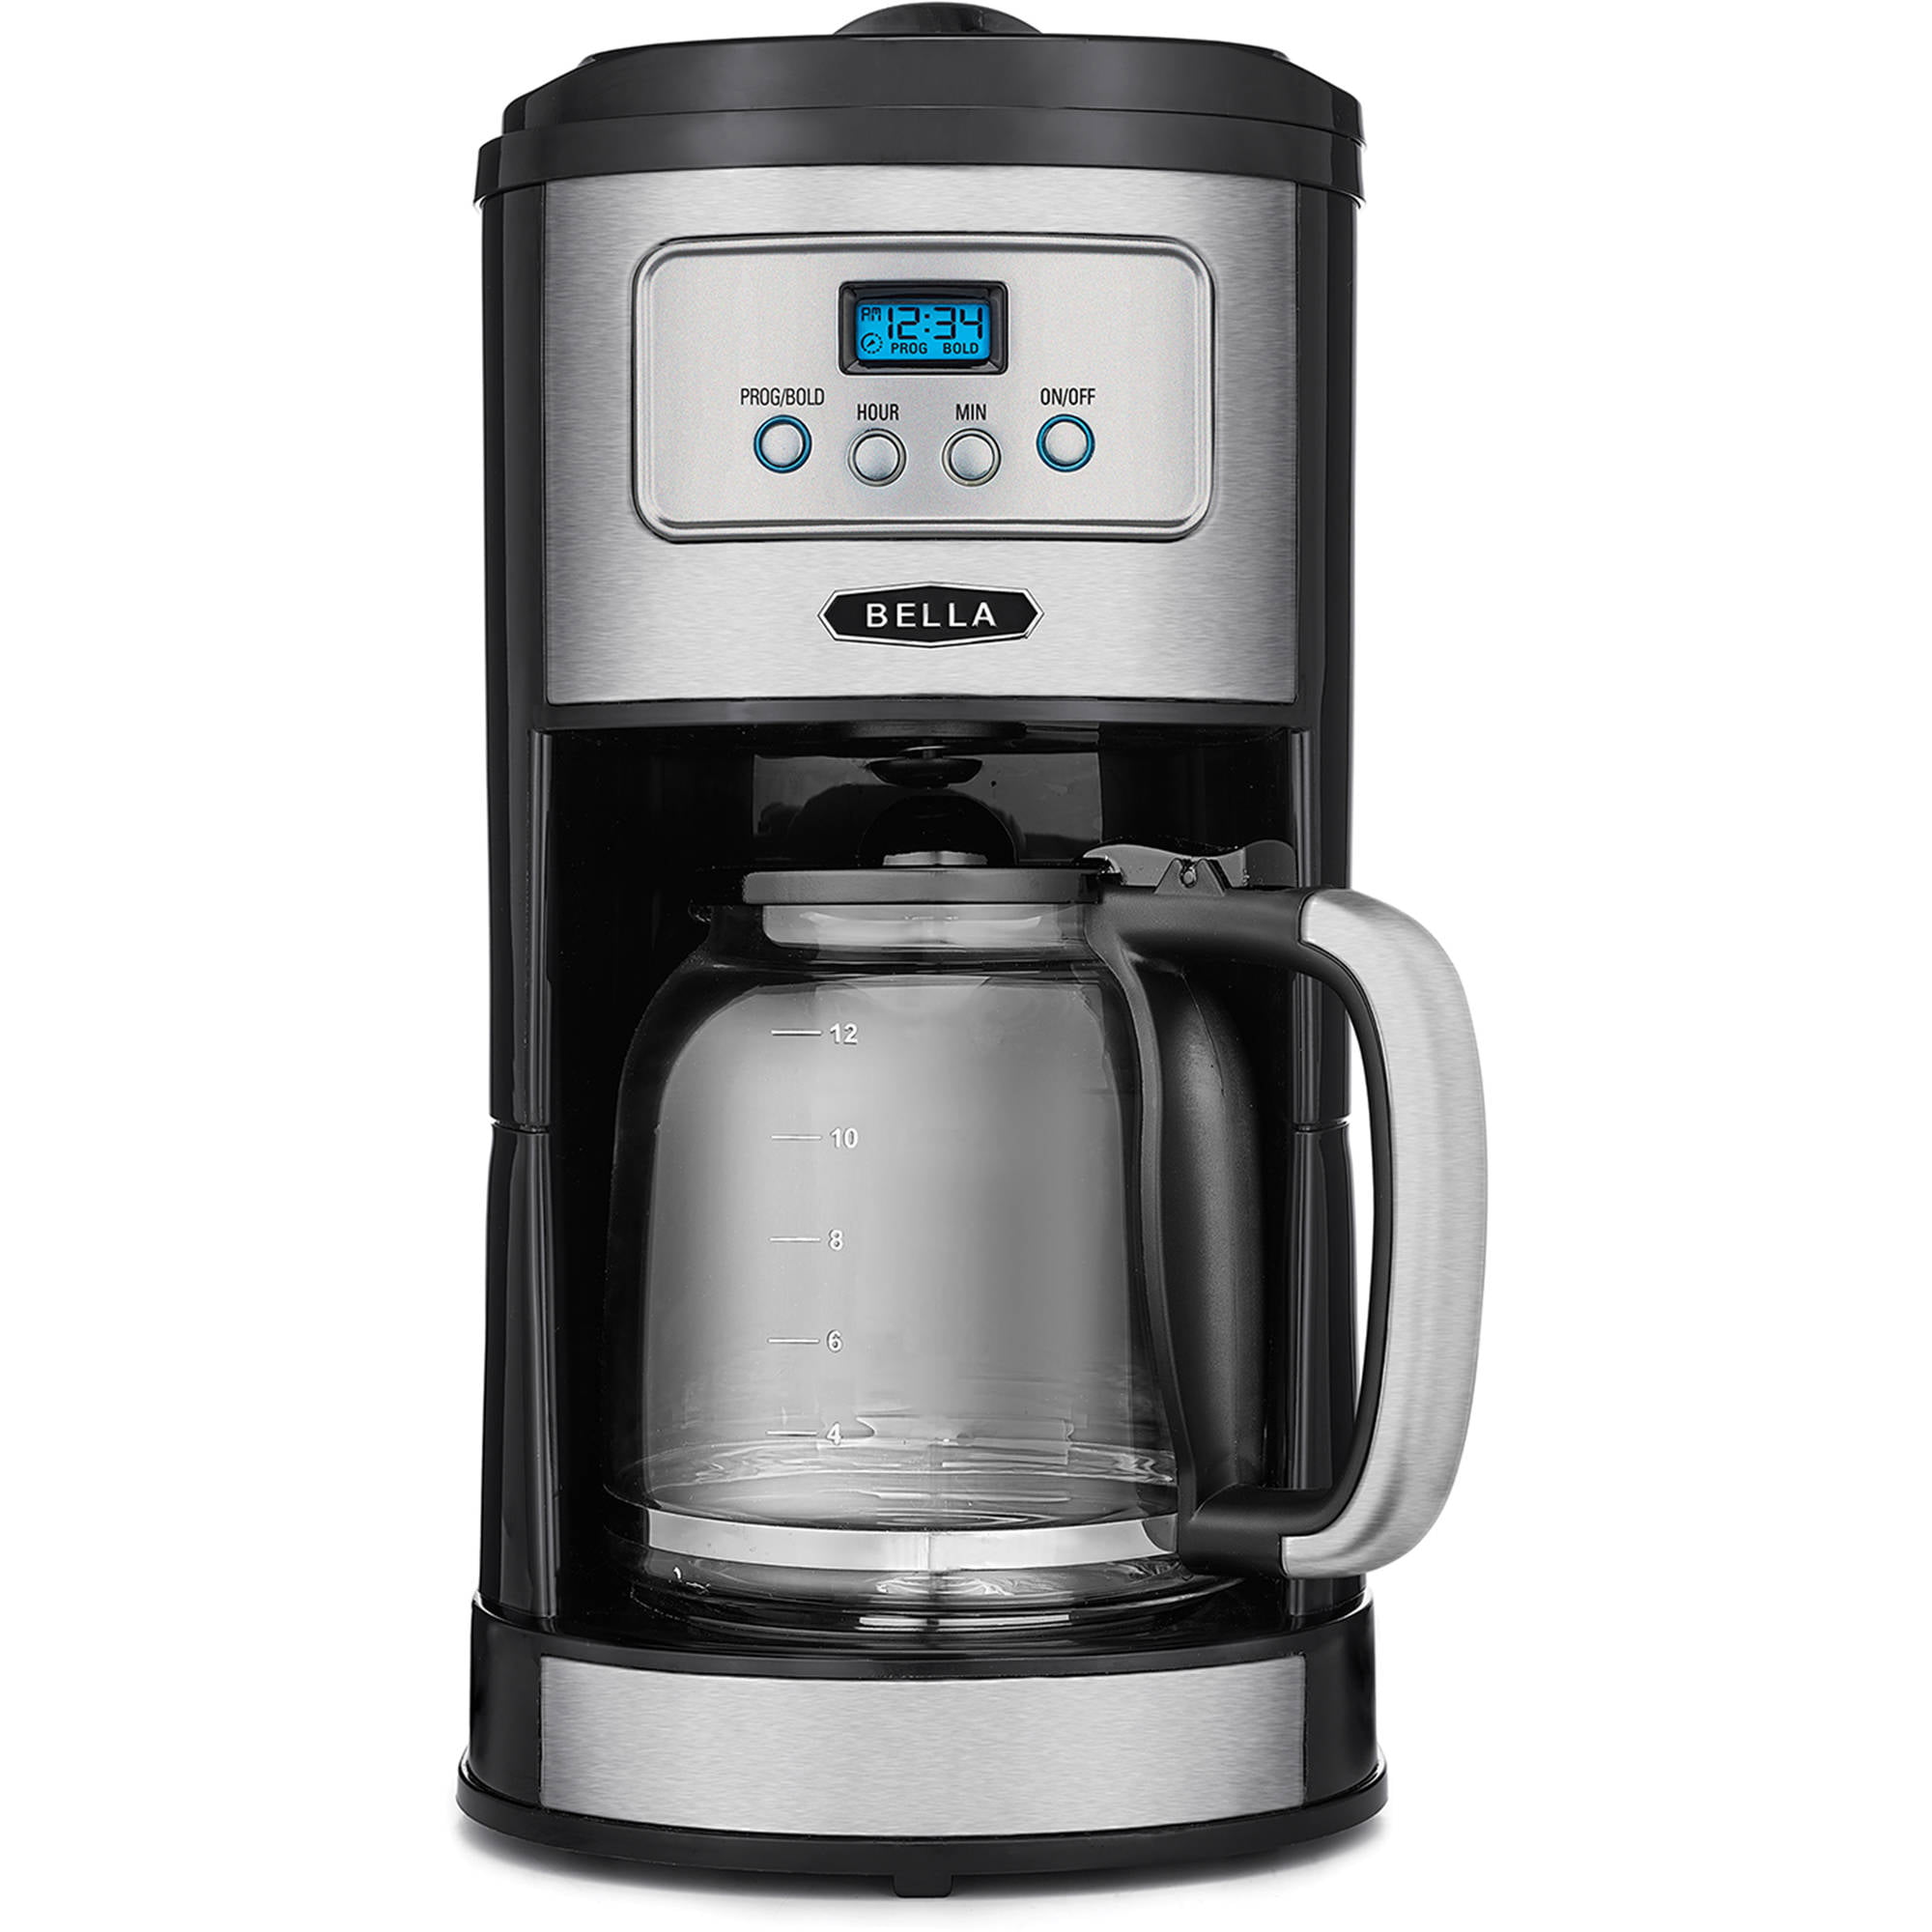 Where can you purchase a Bella coffee maker?